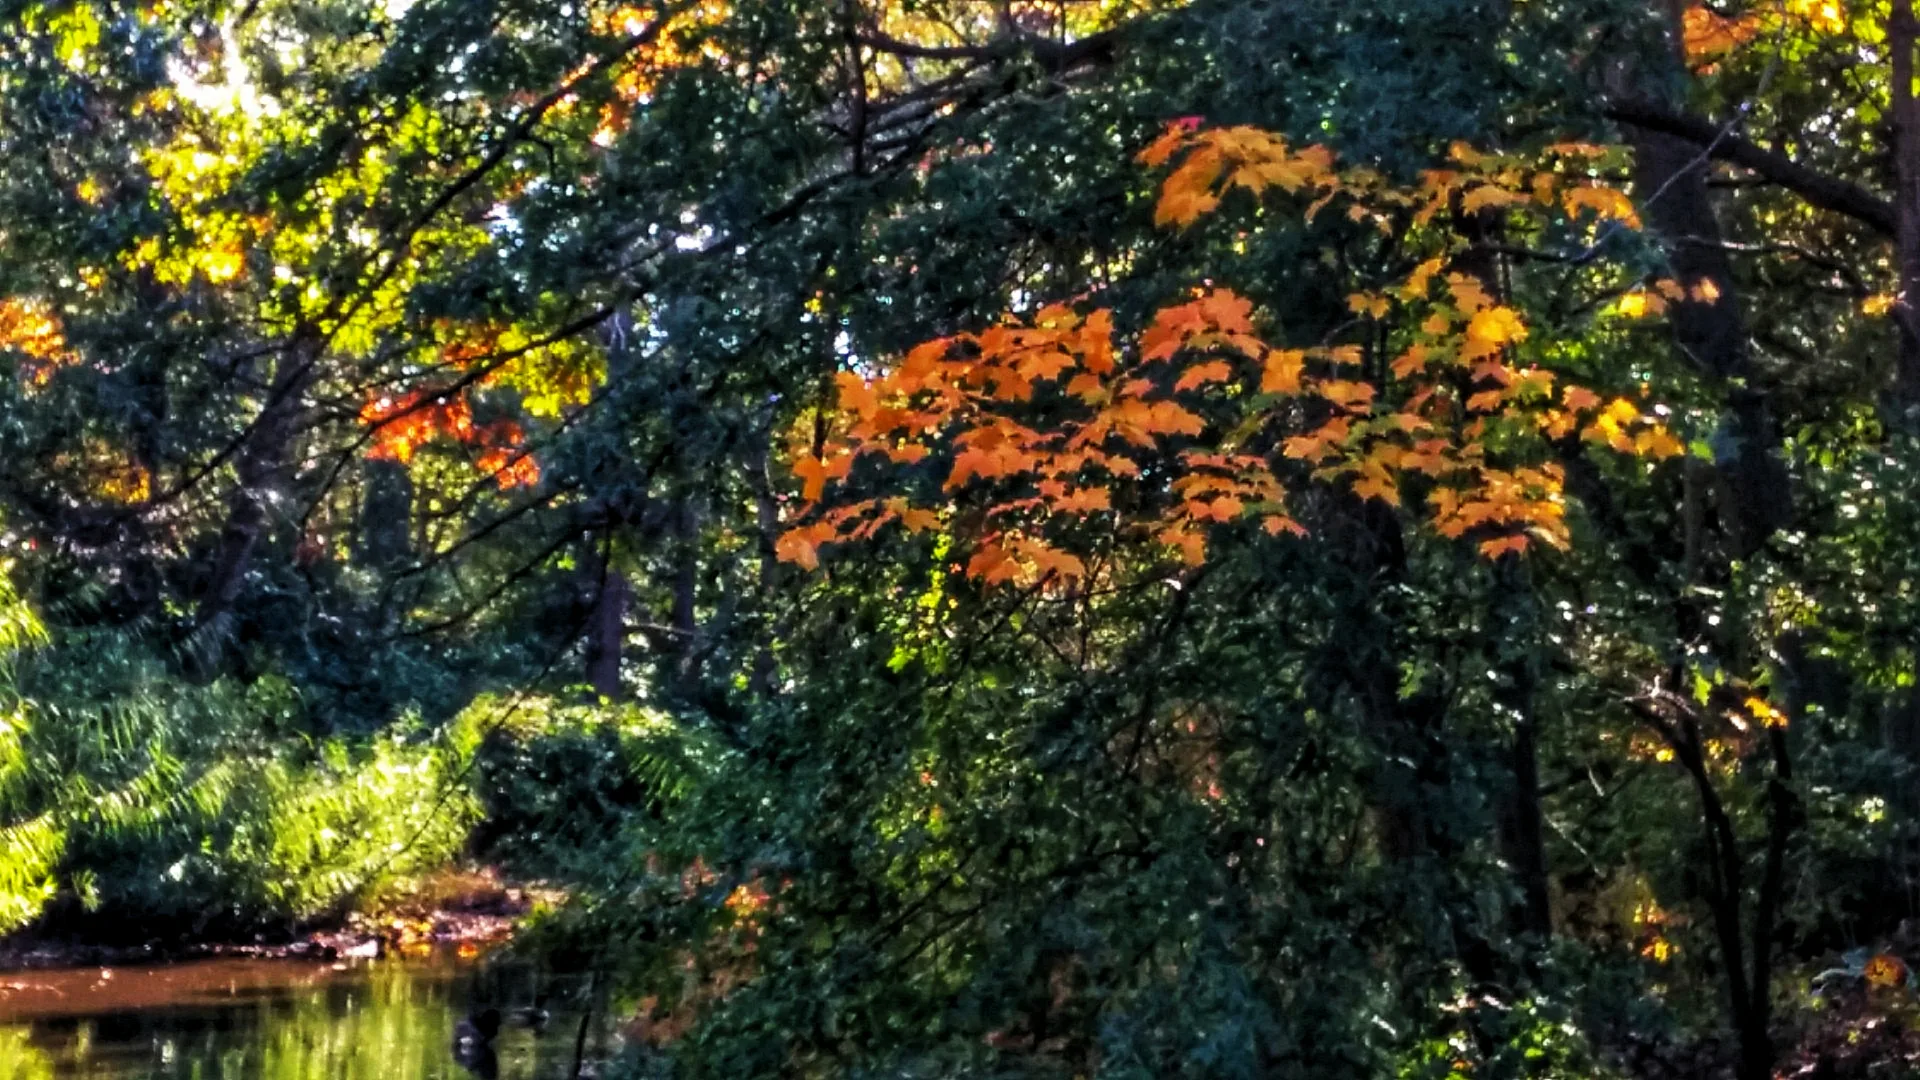 Medium-angle shot showing a cluster of bright orange leaves on a tree, against a backdrop of dark green leaves that are not in direct sunlilight. The early afternoon sun brightly illuminates vegetation behind the tree. At the lower left, some of the vegetation reflects in Muddy River. The photo has an impressionistic look, with dark and bright areas.